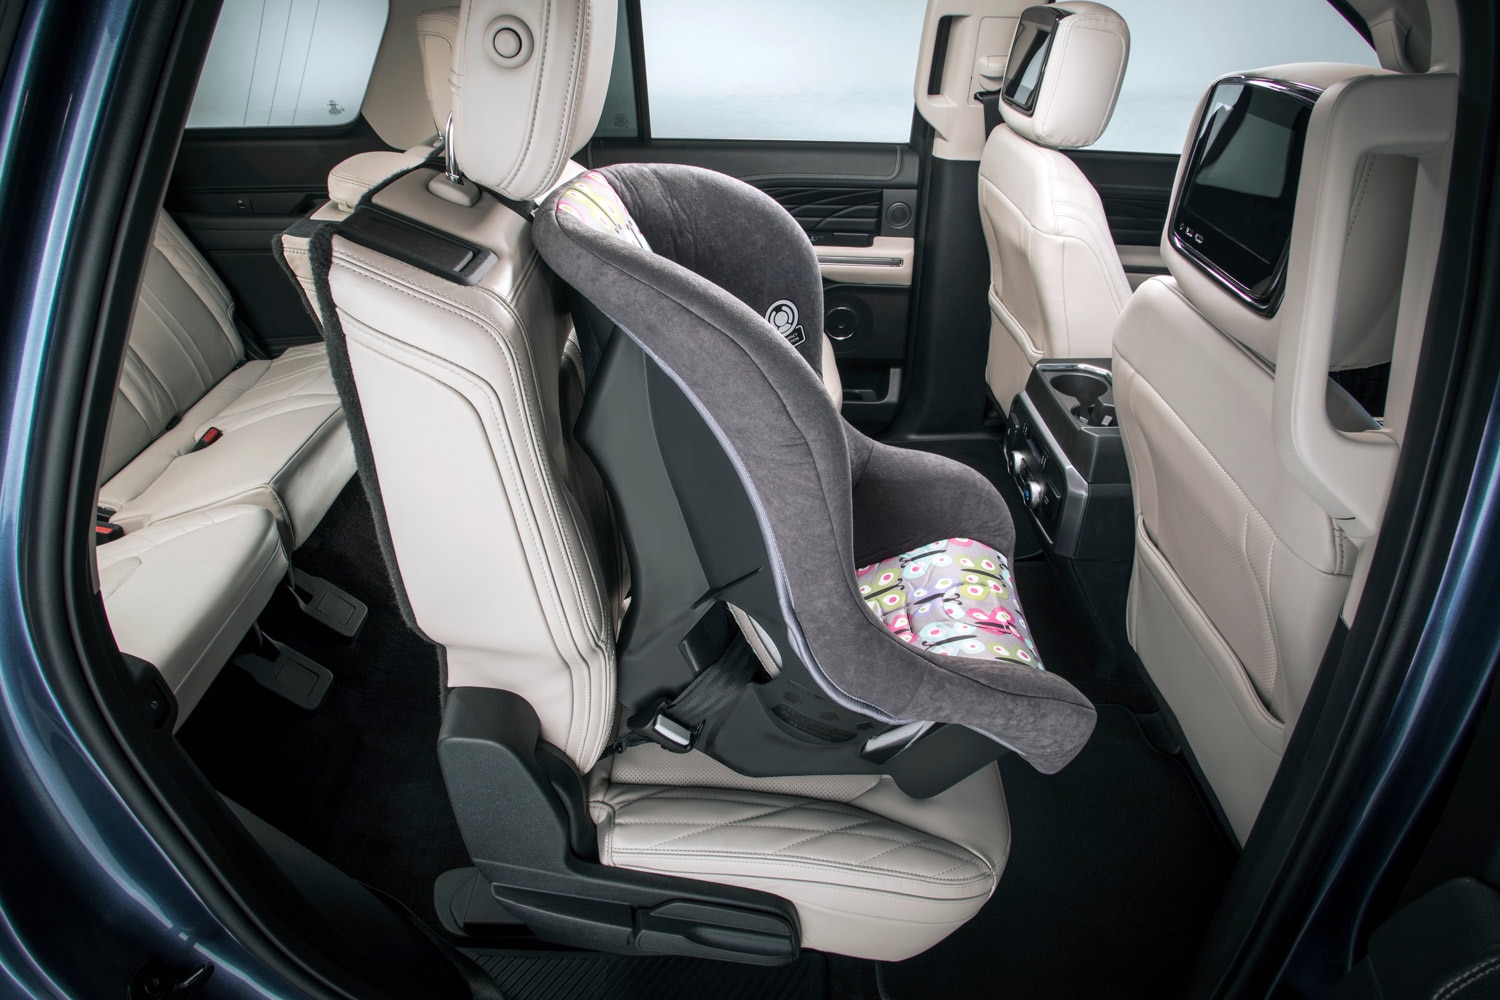 Ford child seat facing forward